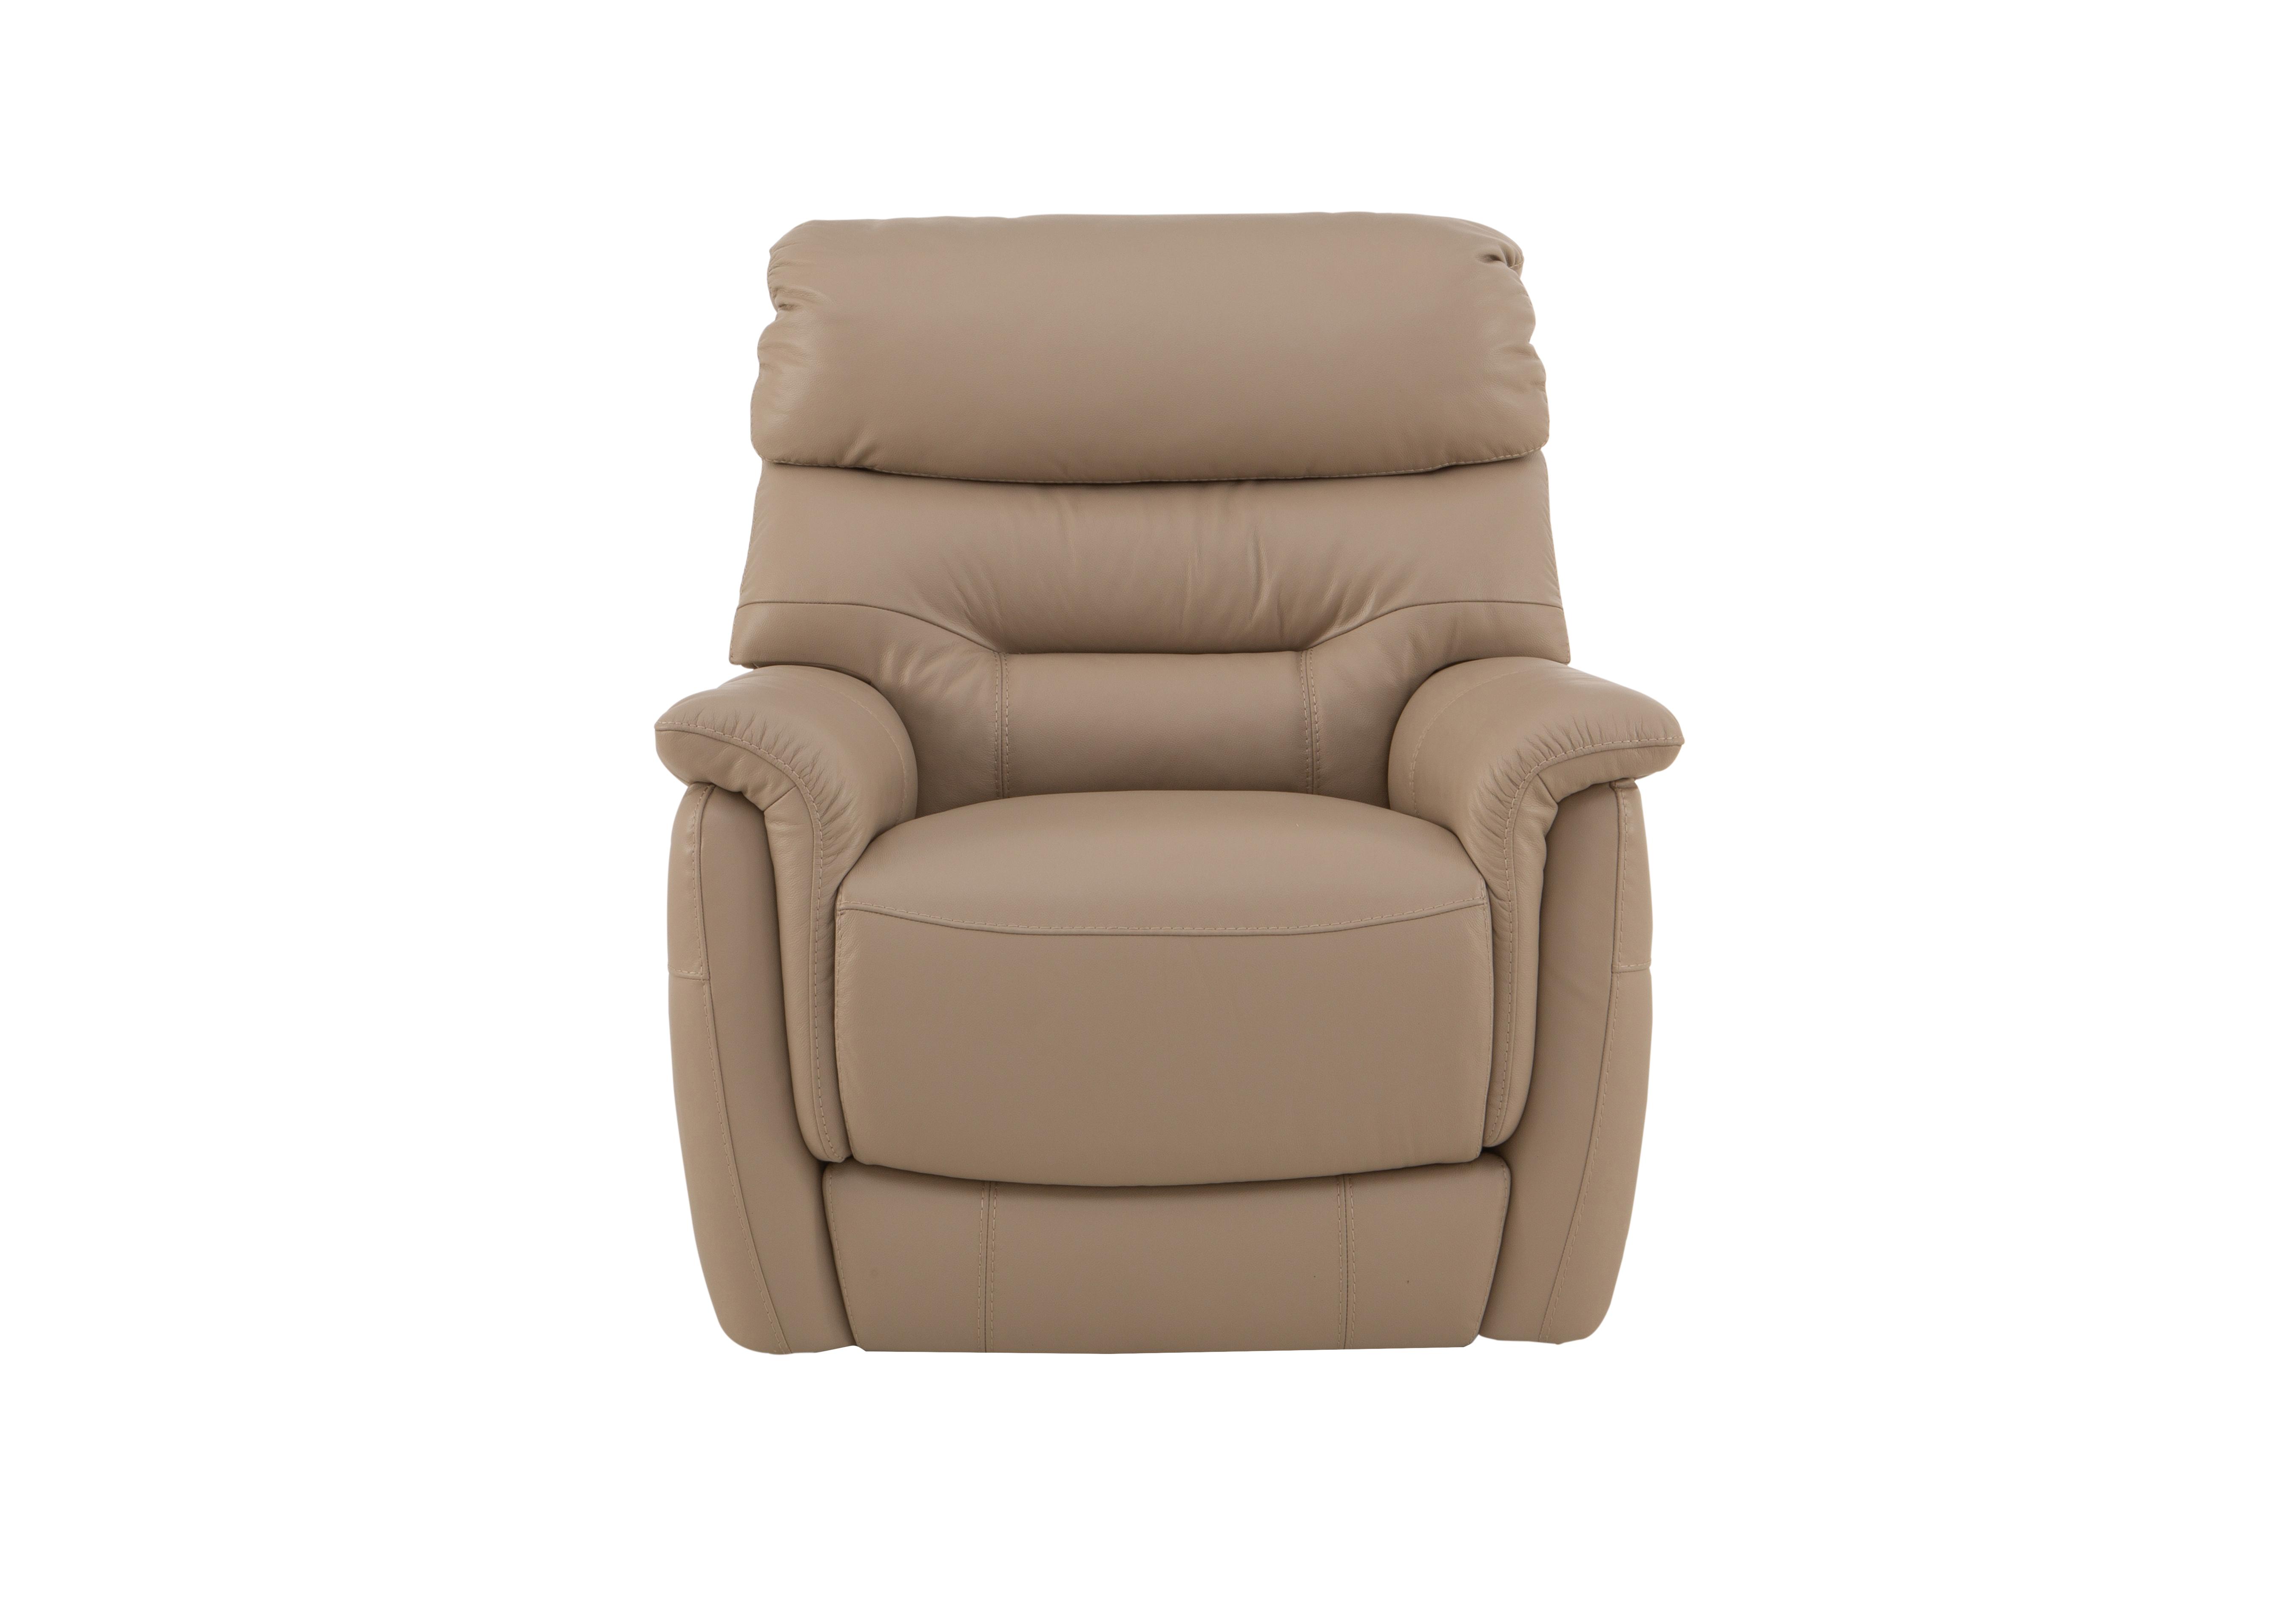 Chicago Leather Armchair in Bv-039c Pebble on Furniture Village